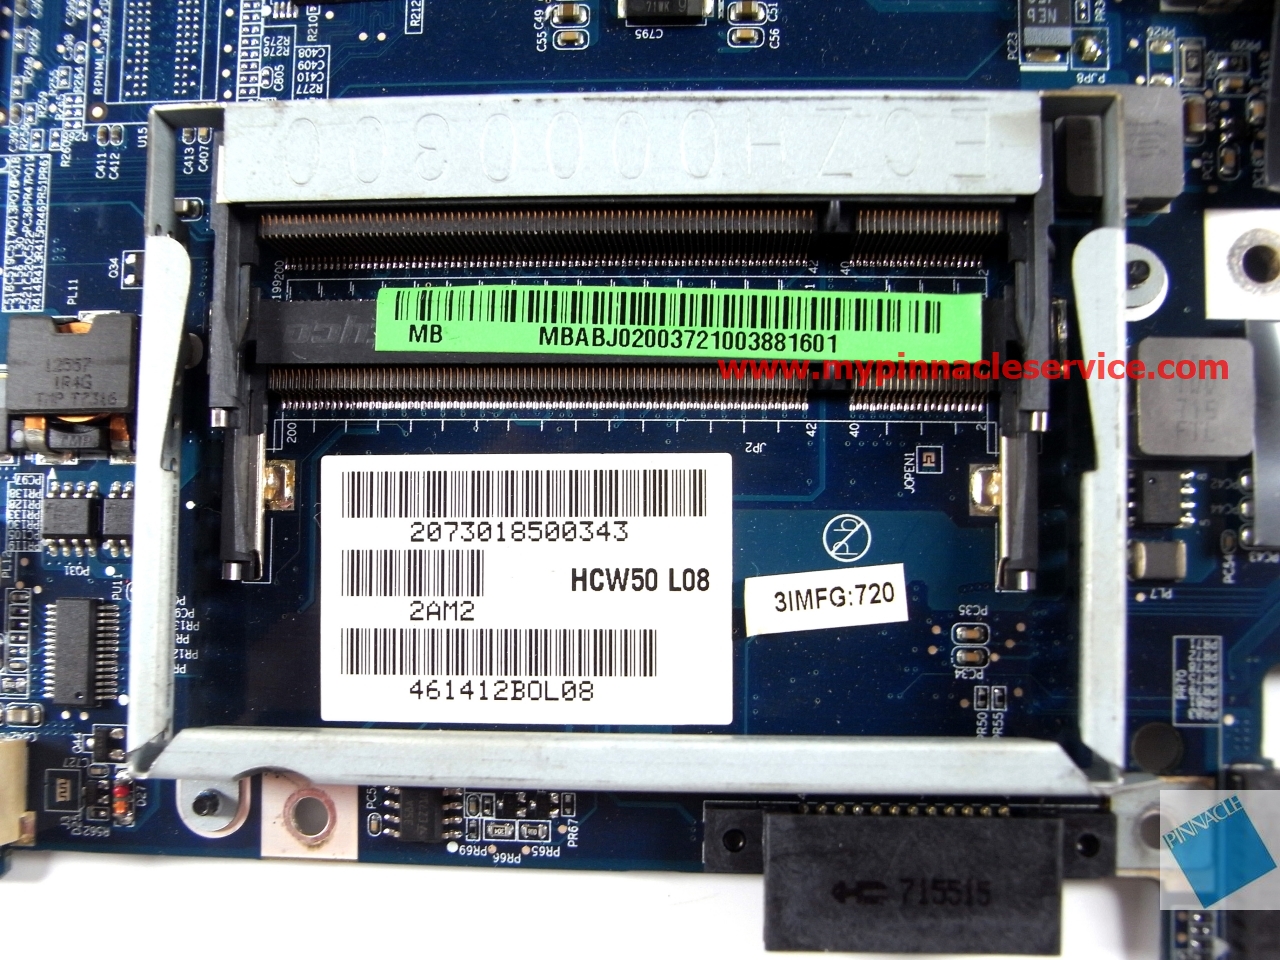 mbabj02003-motherboard-for-acer-aspire-3100-5100-5110-sata-hdd-with-x1300-la-3151p-r0010437.jpg